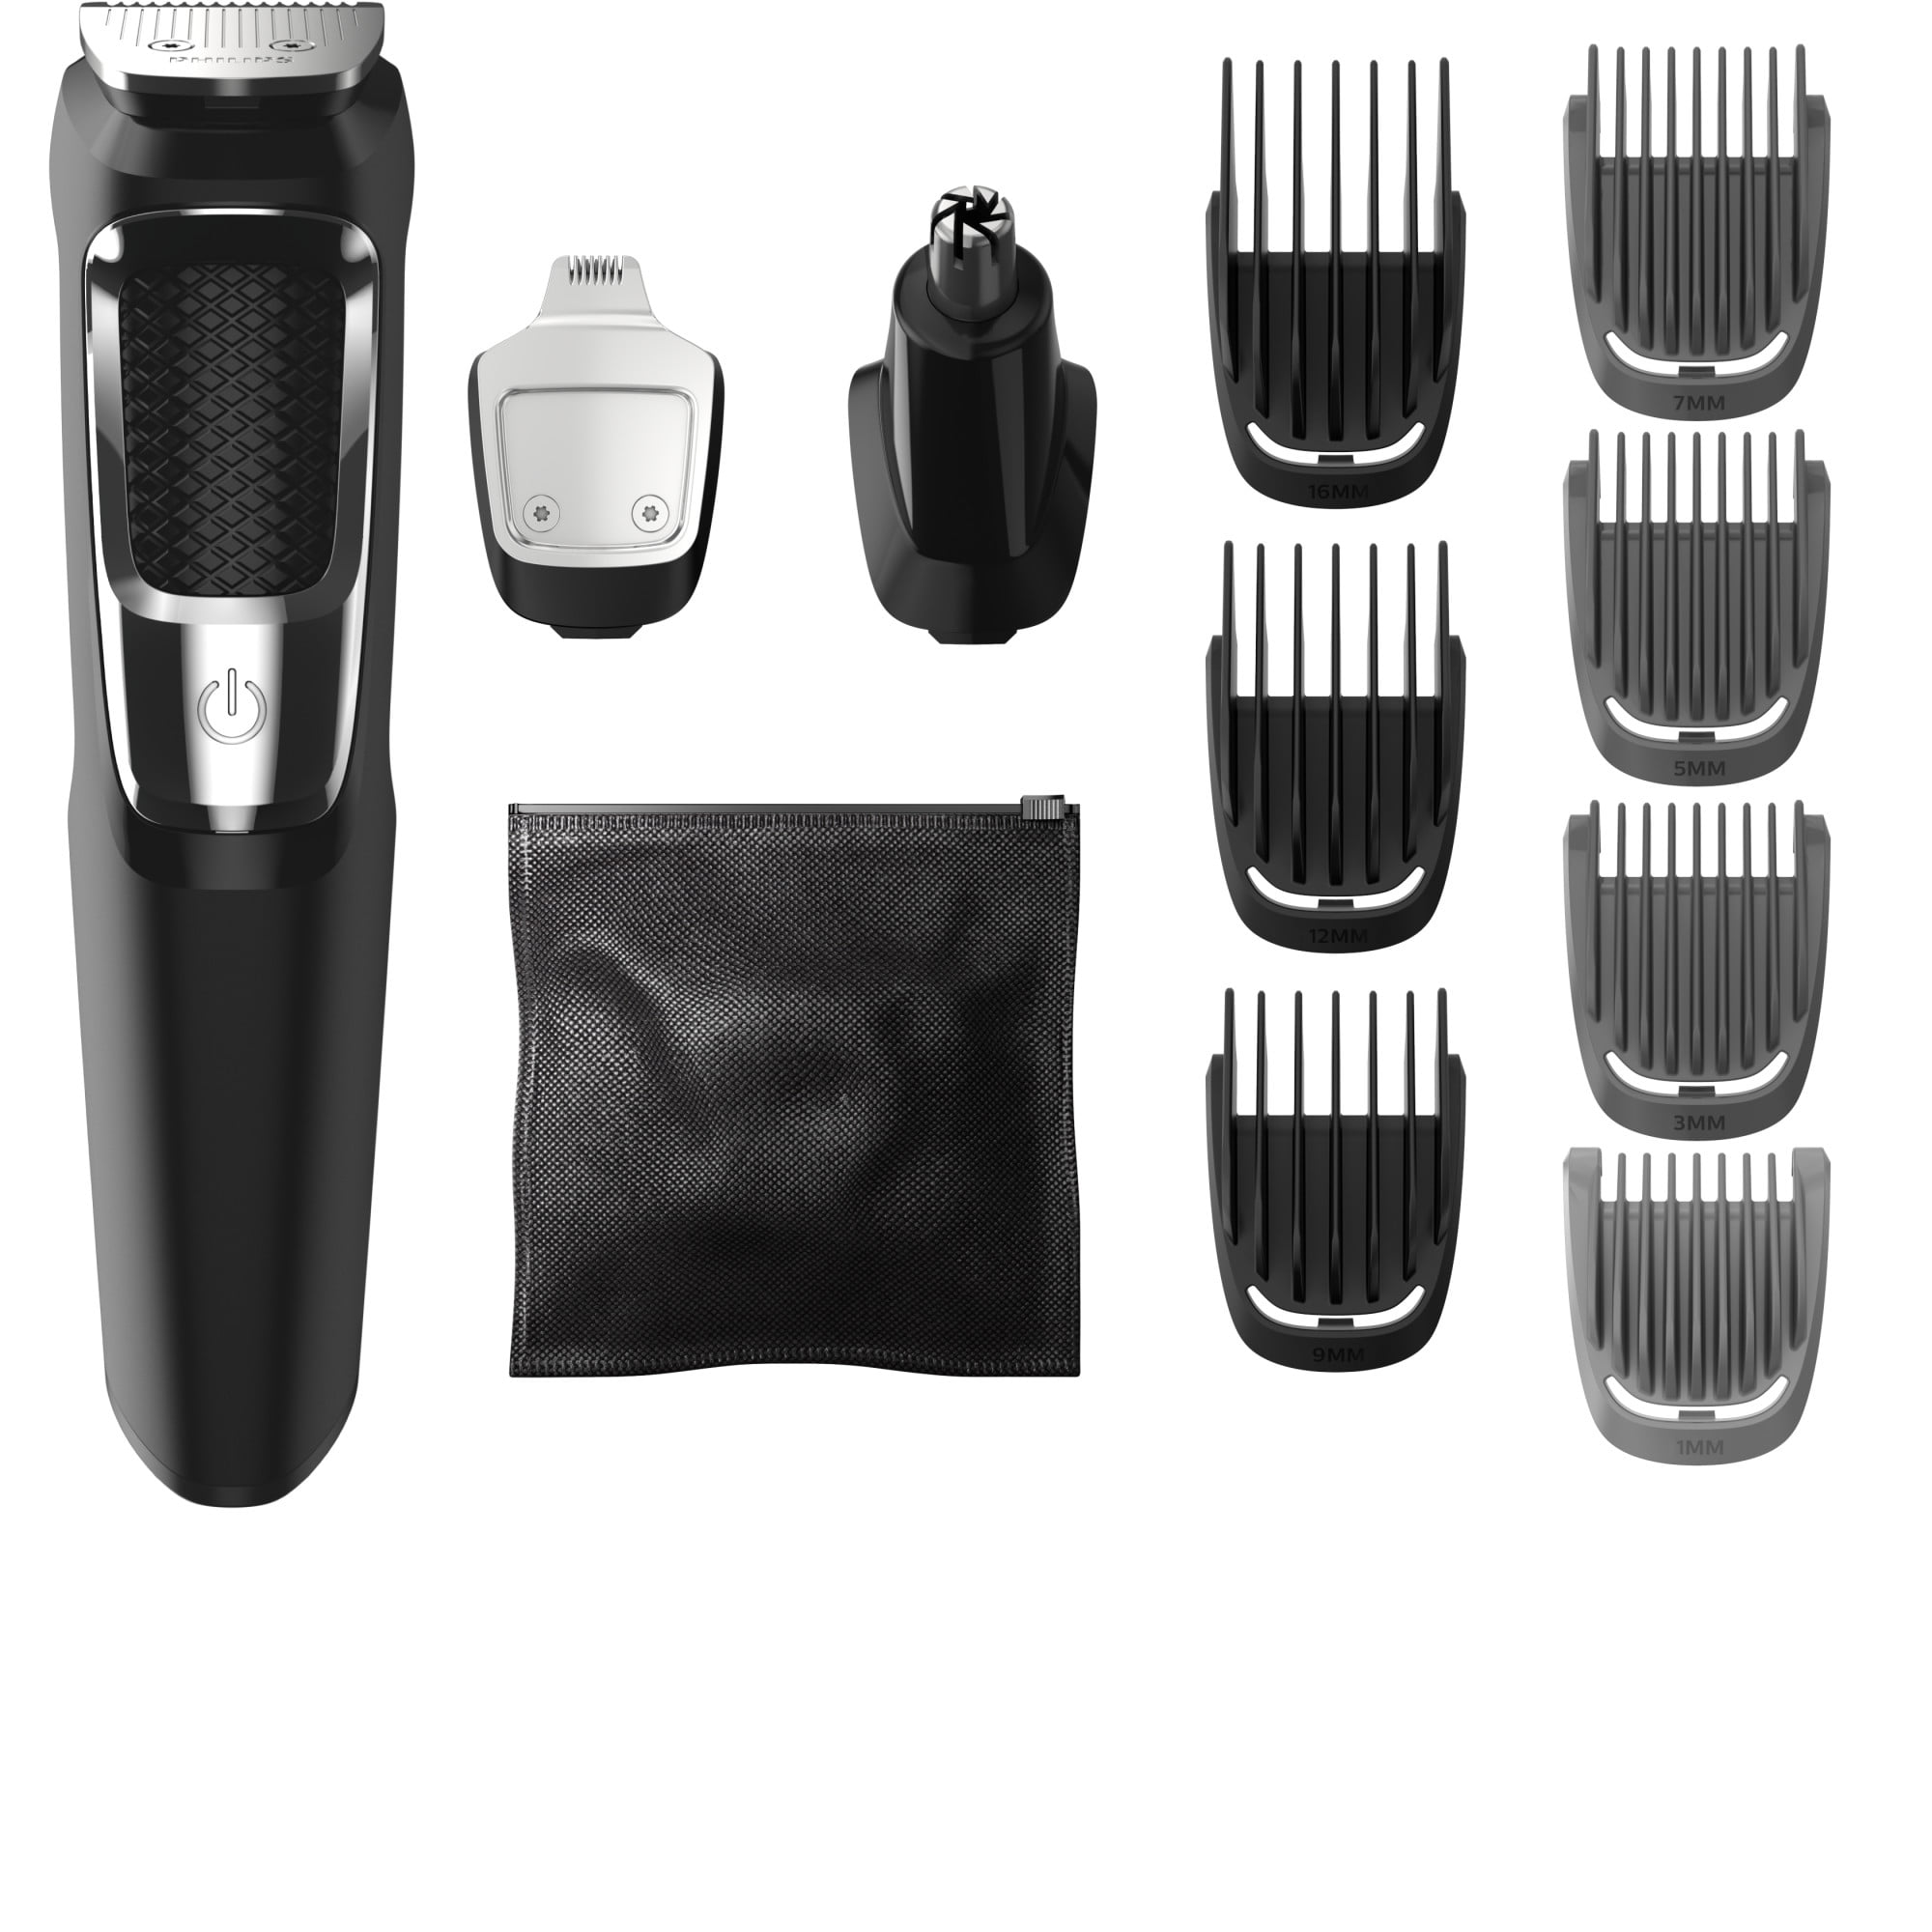 HTC AT-179 Beard Trimmer And Hair Clipper For Men - Shaver Shop Bangladesh